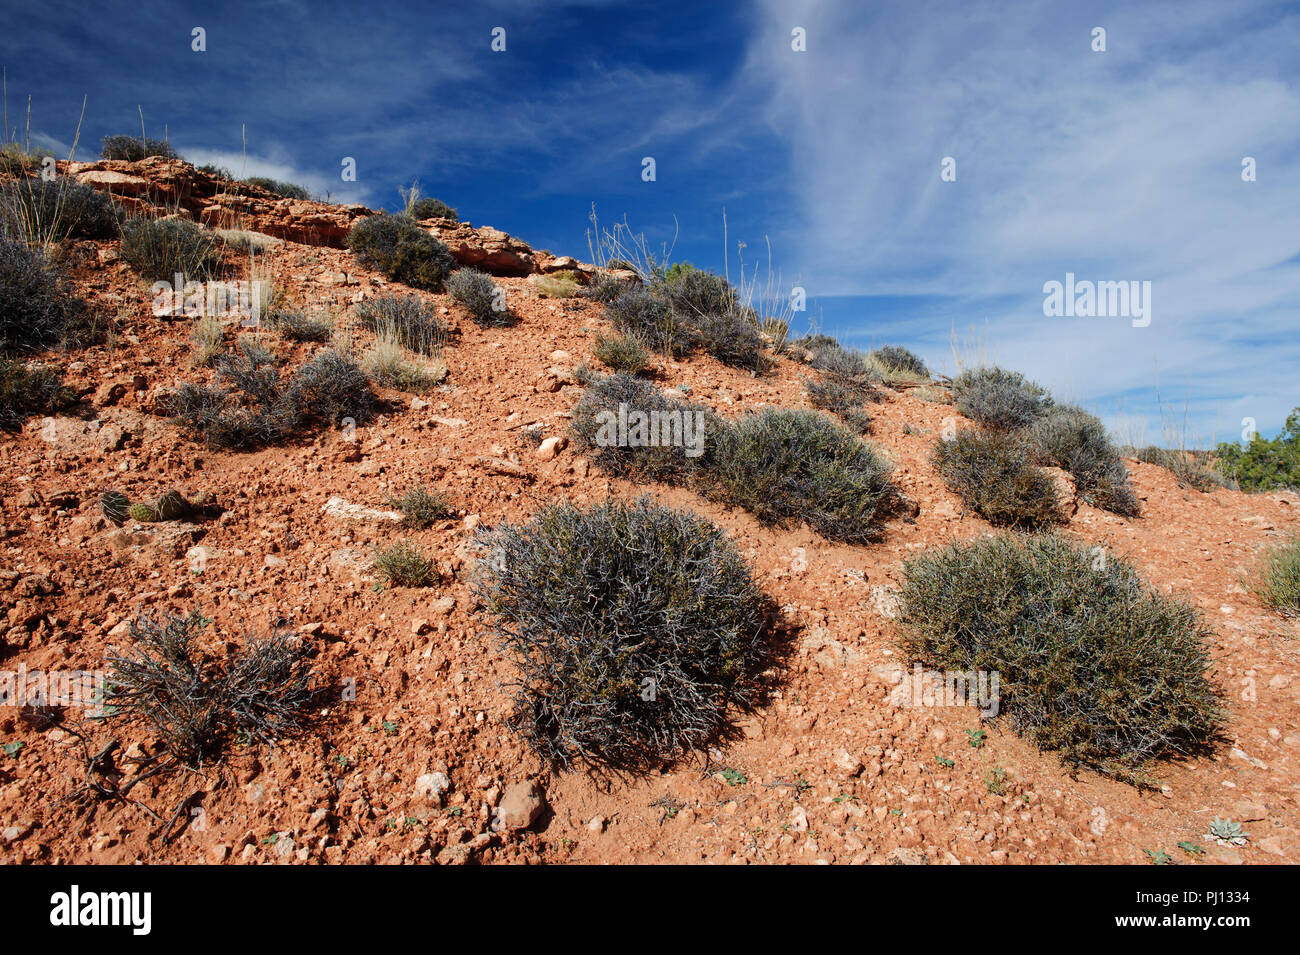 Russian thistle bushes growing on the side of a hill in Dead Horse Point State Park, Utah, USA. Stock Photo